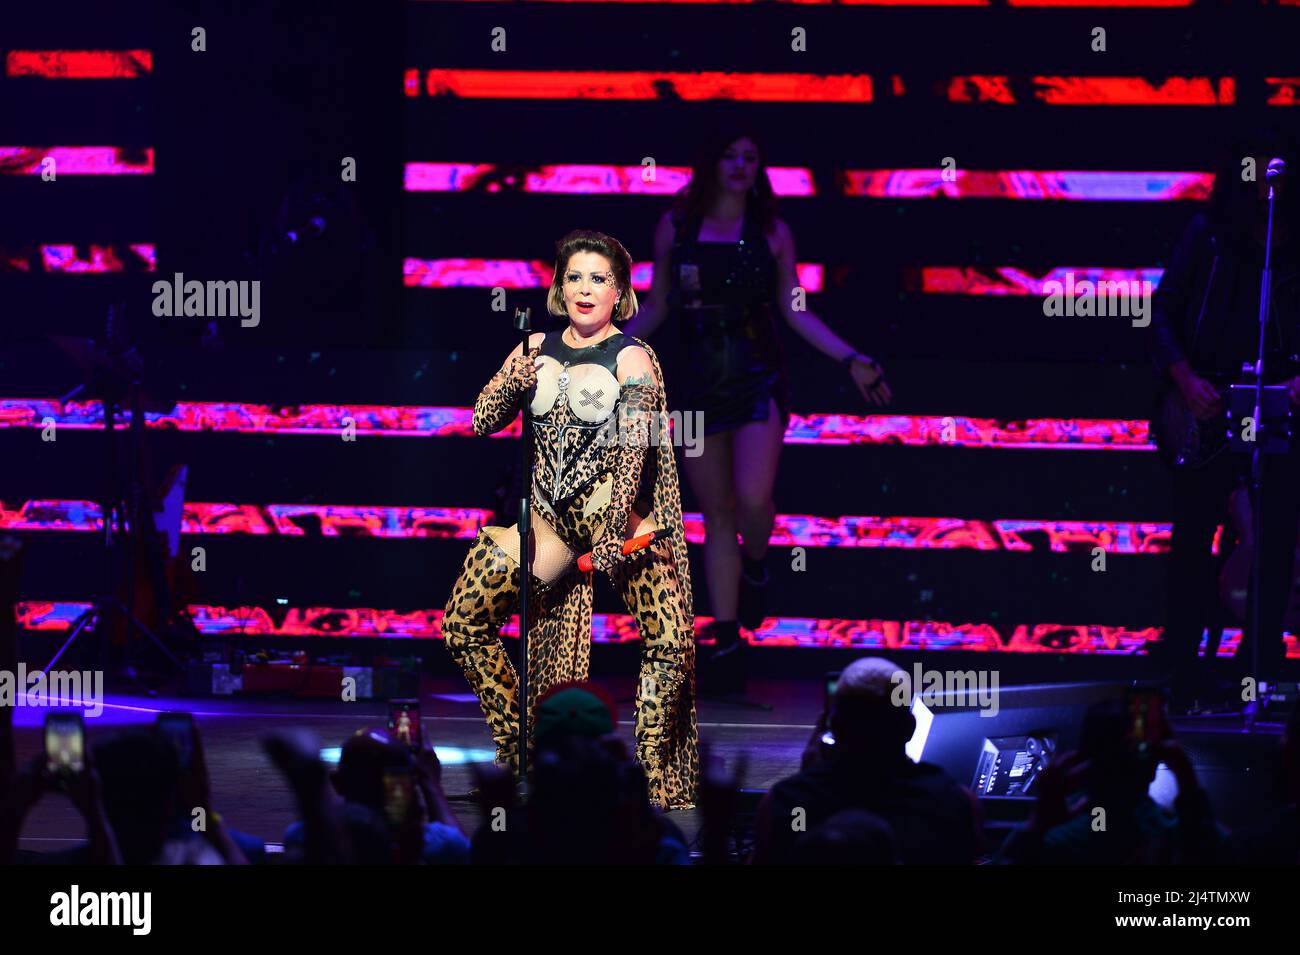 Hollywood, Florida, USA. 16th Apr, 2022. Alejandra Guzman performs onstage during The Perrisimas Tour at Hard Rock Live in the Seminole Hard Rock Hotel & Casino on April 16, 2022 in Hollywood, Florida. Credit: Mpi10/Media Punch/Alamy Live News Stock Photo